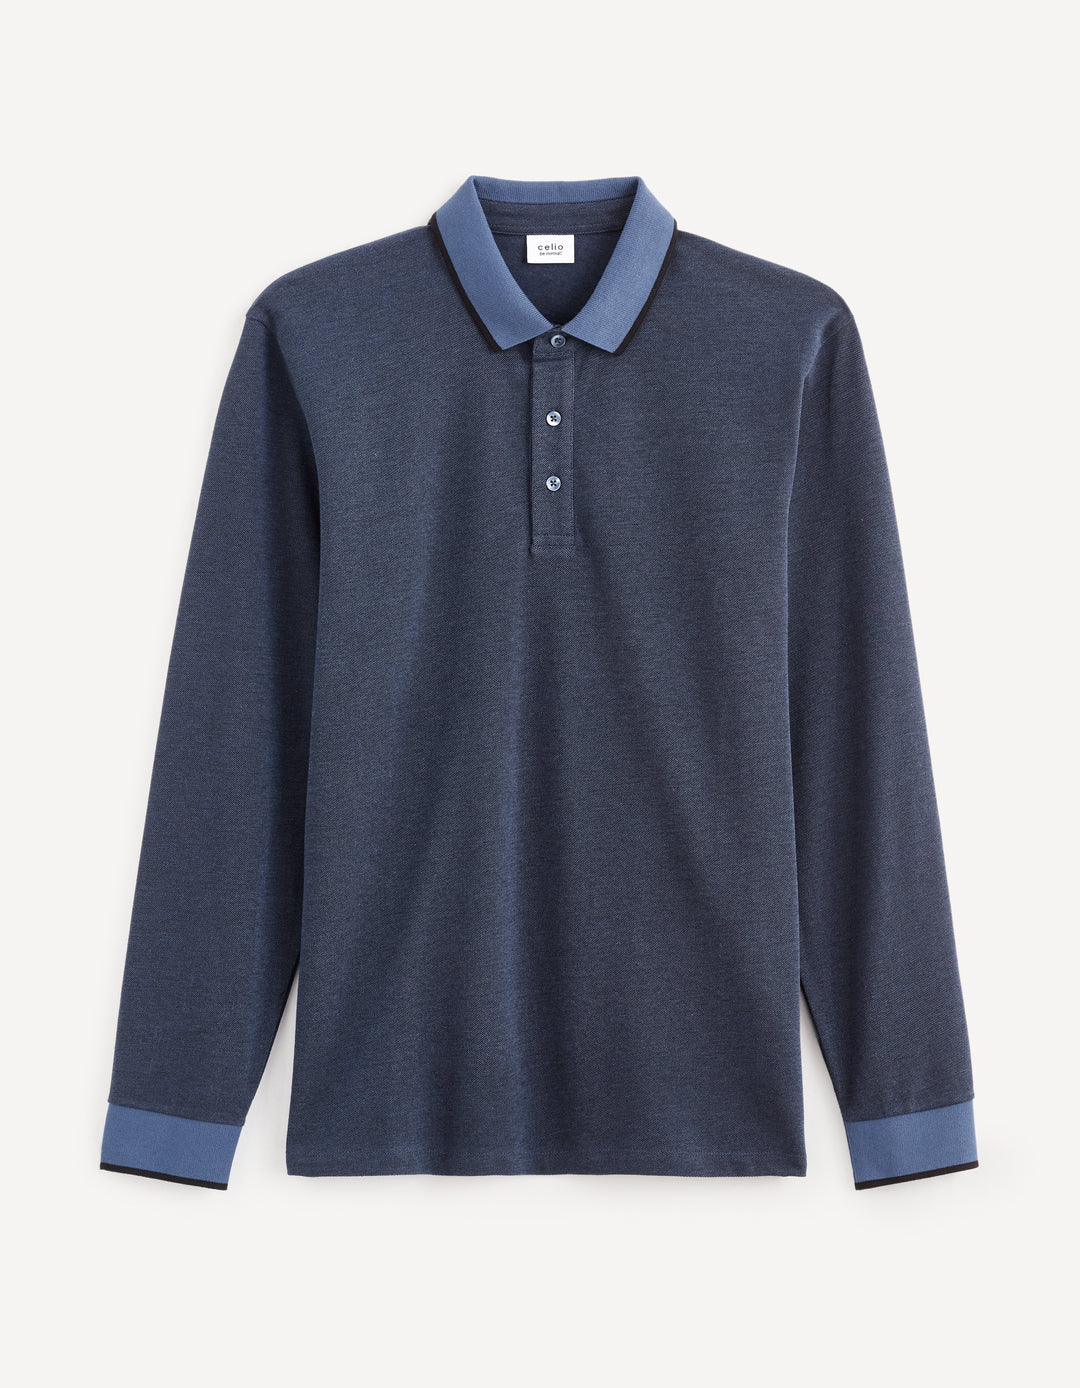 Men - Knitted - Polo Shirt - Long sleeves